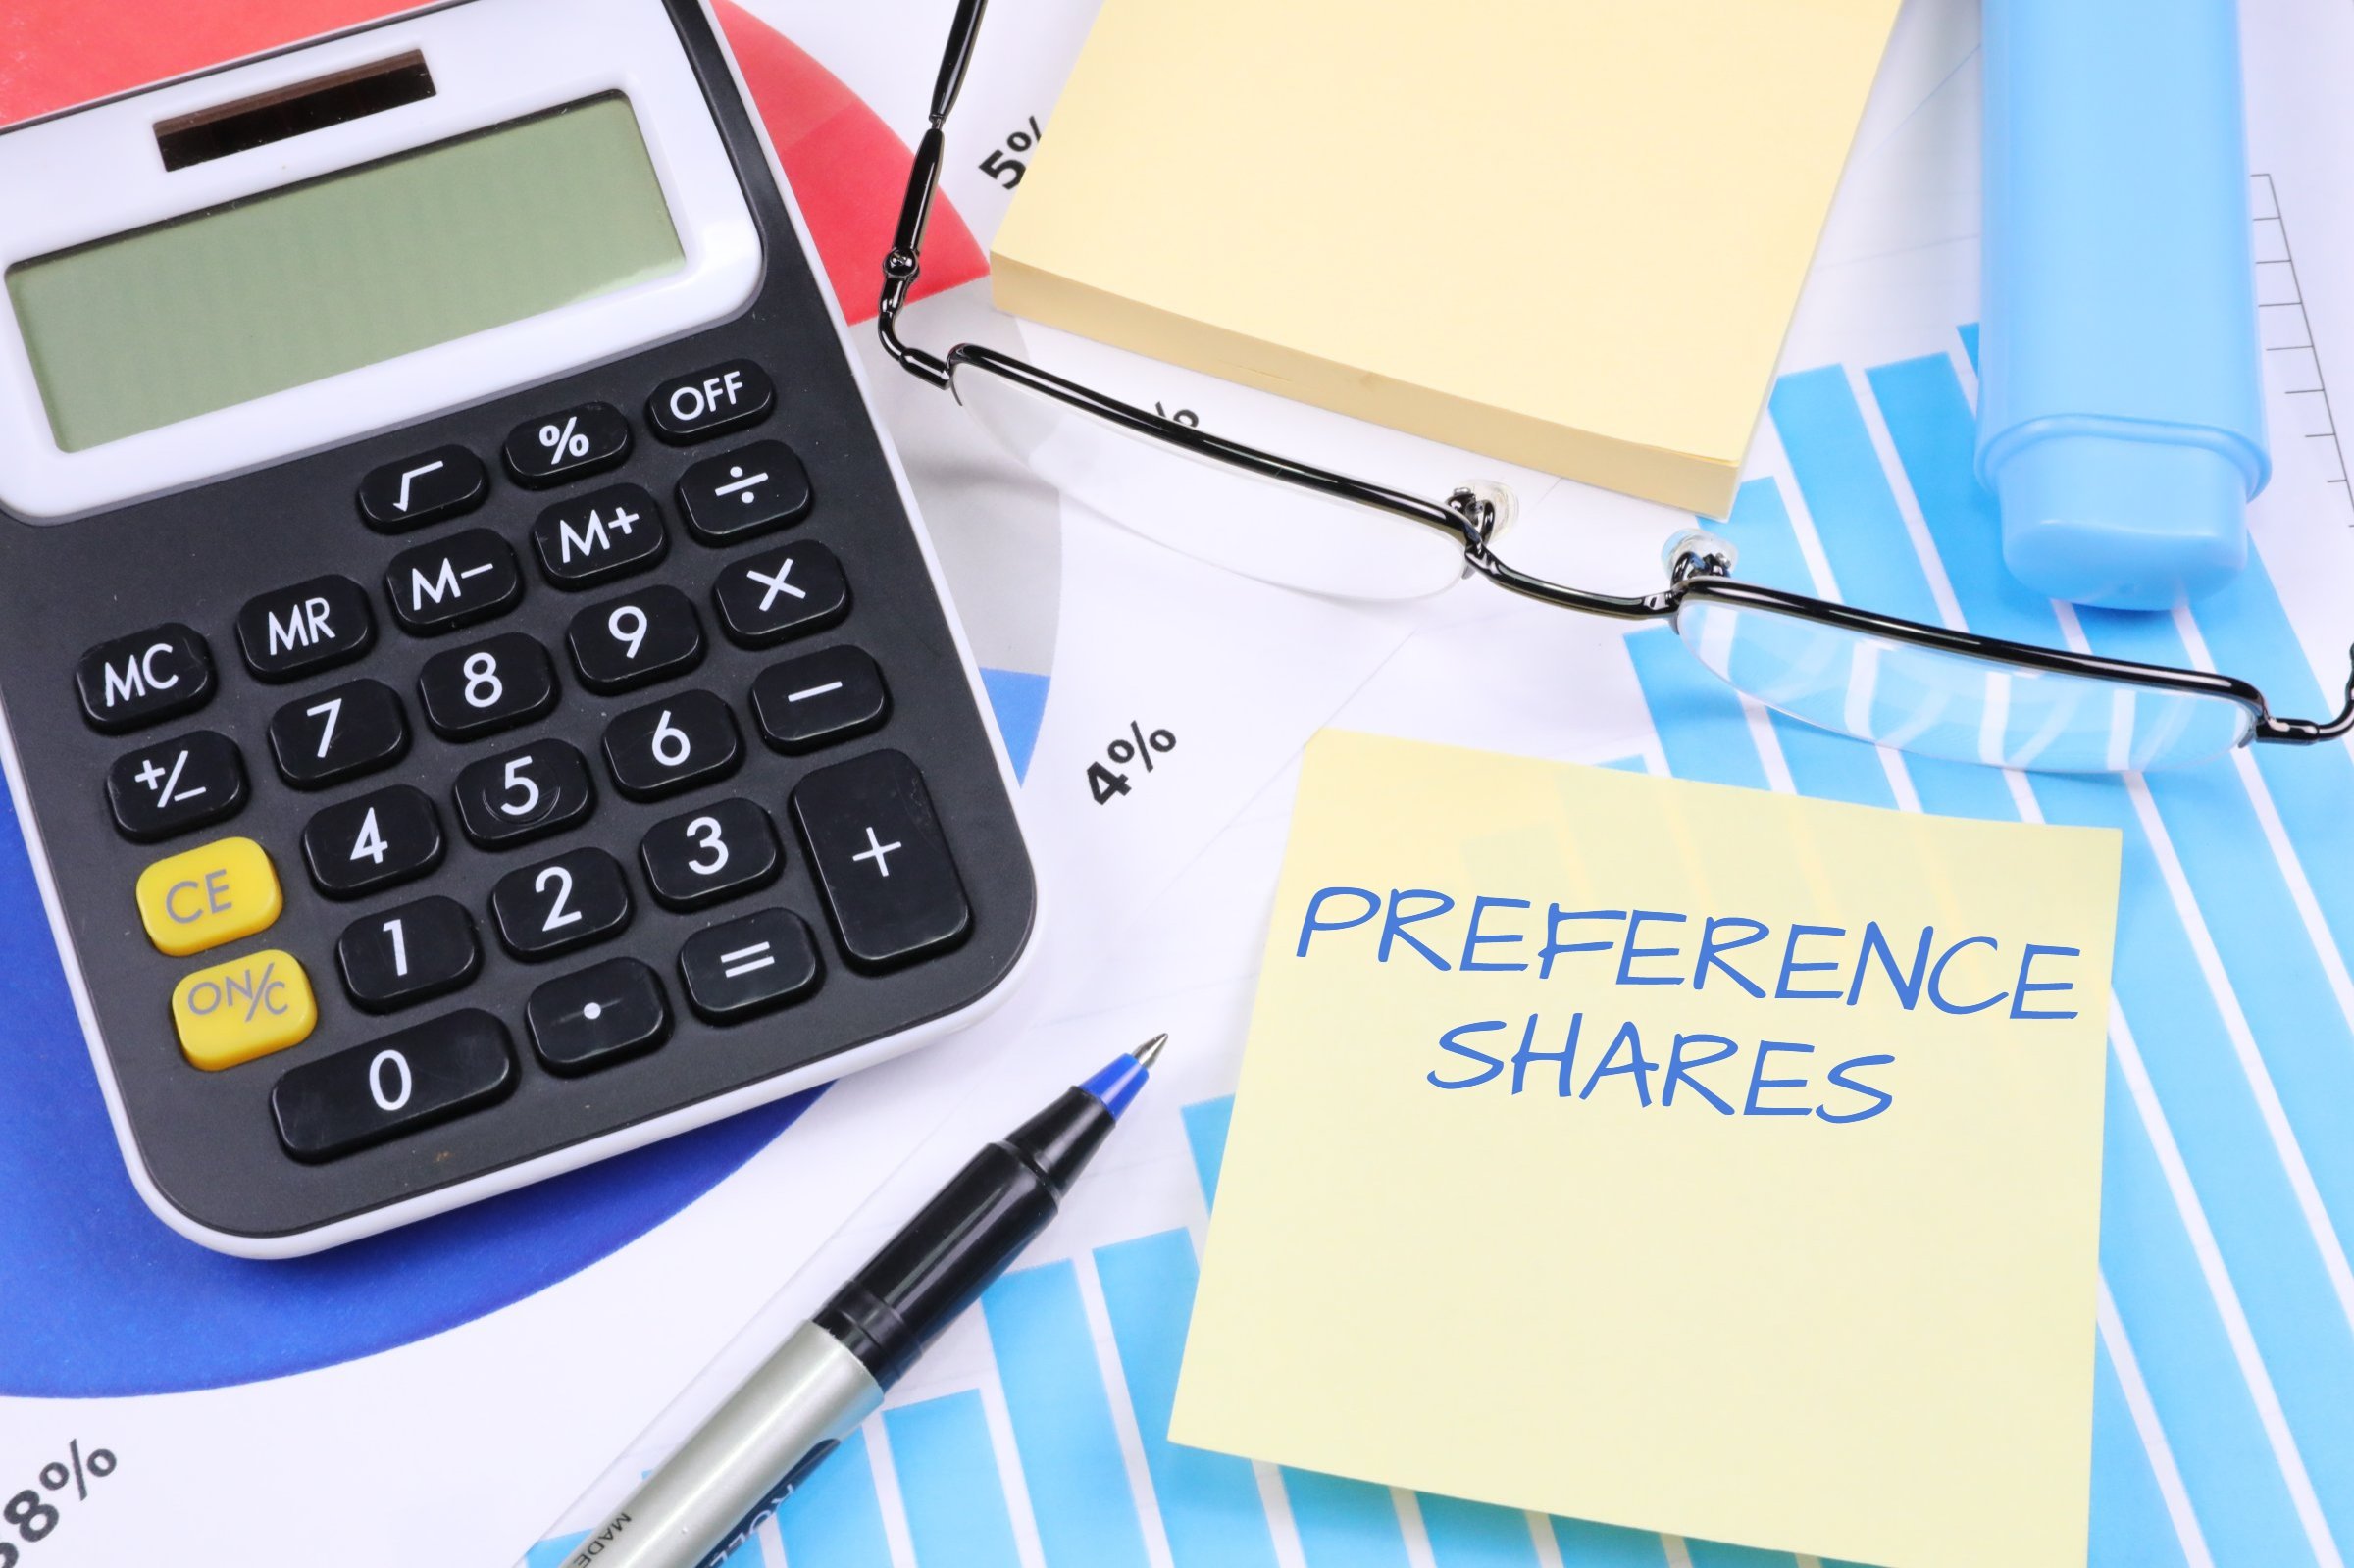 Preference Shares